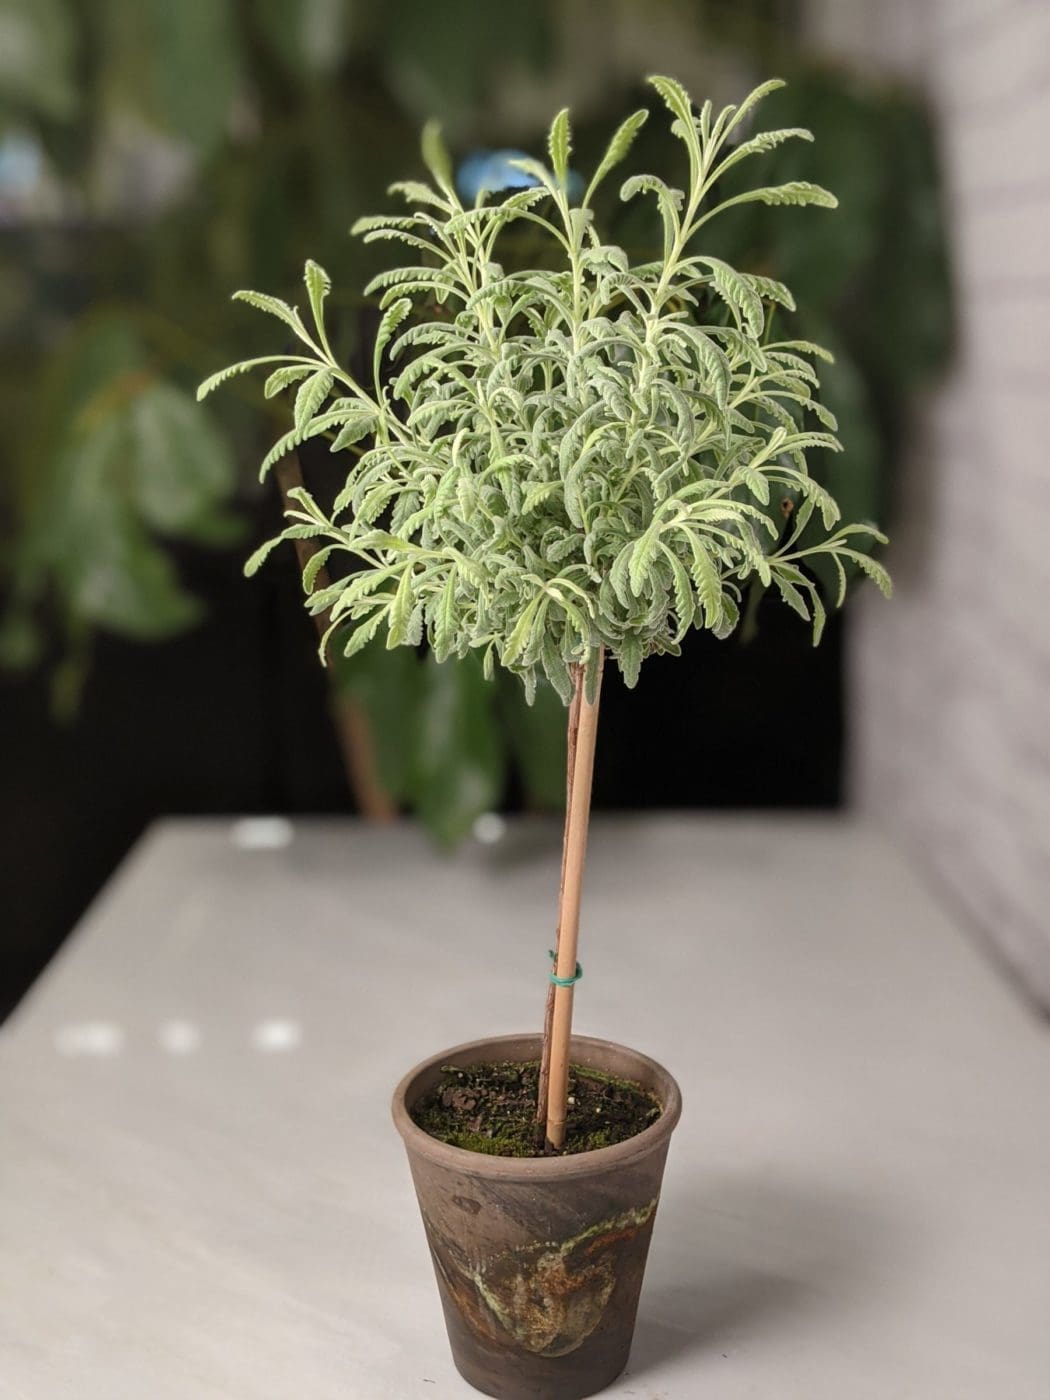 Small potted tree plant in a vase.